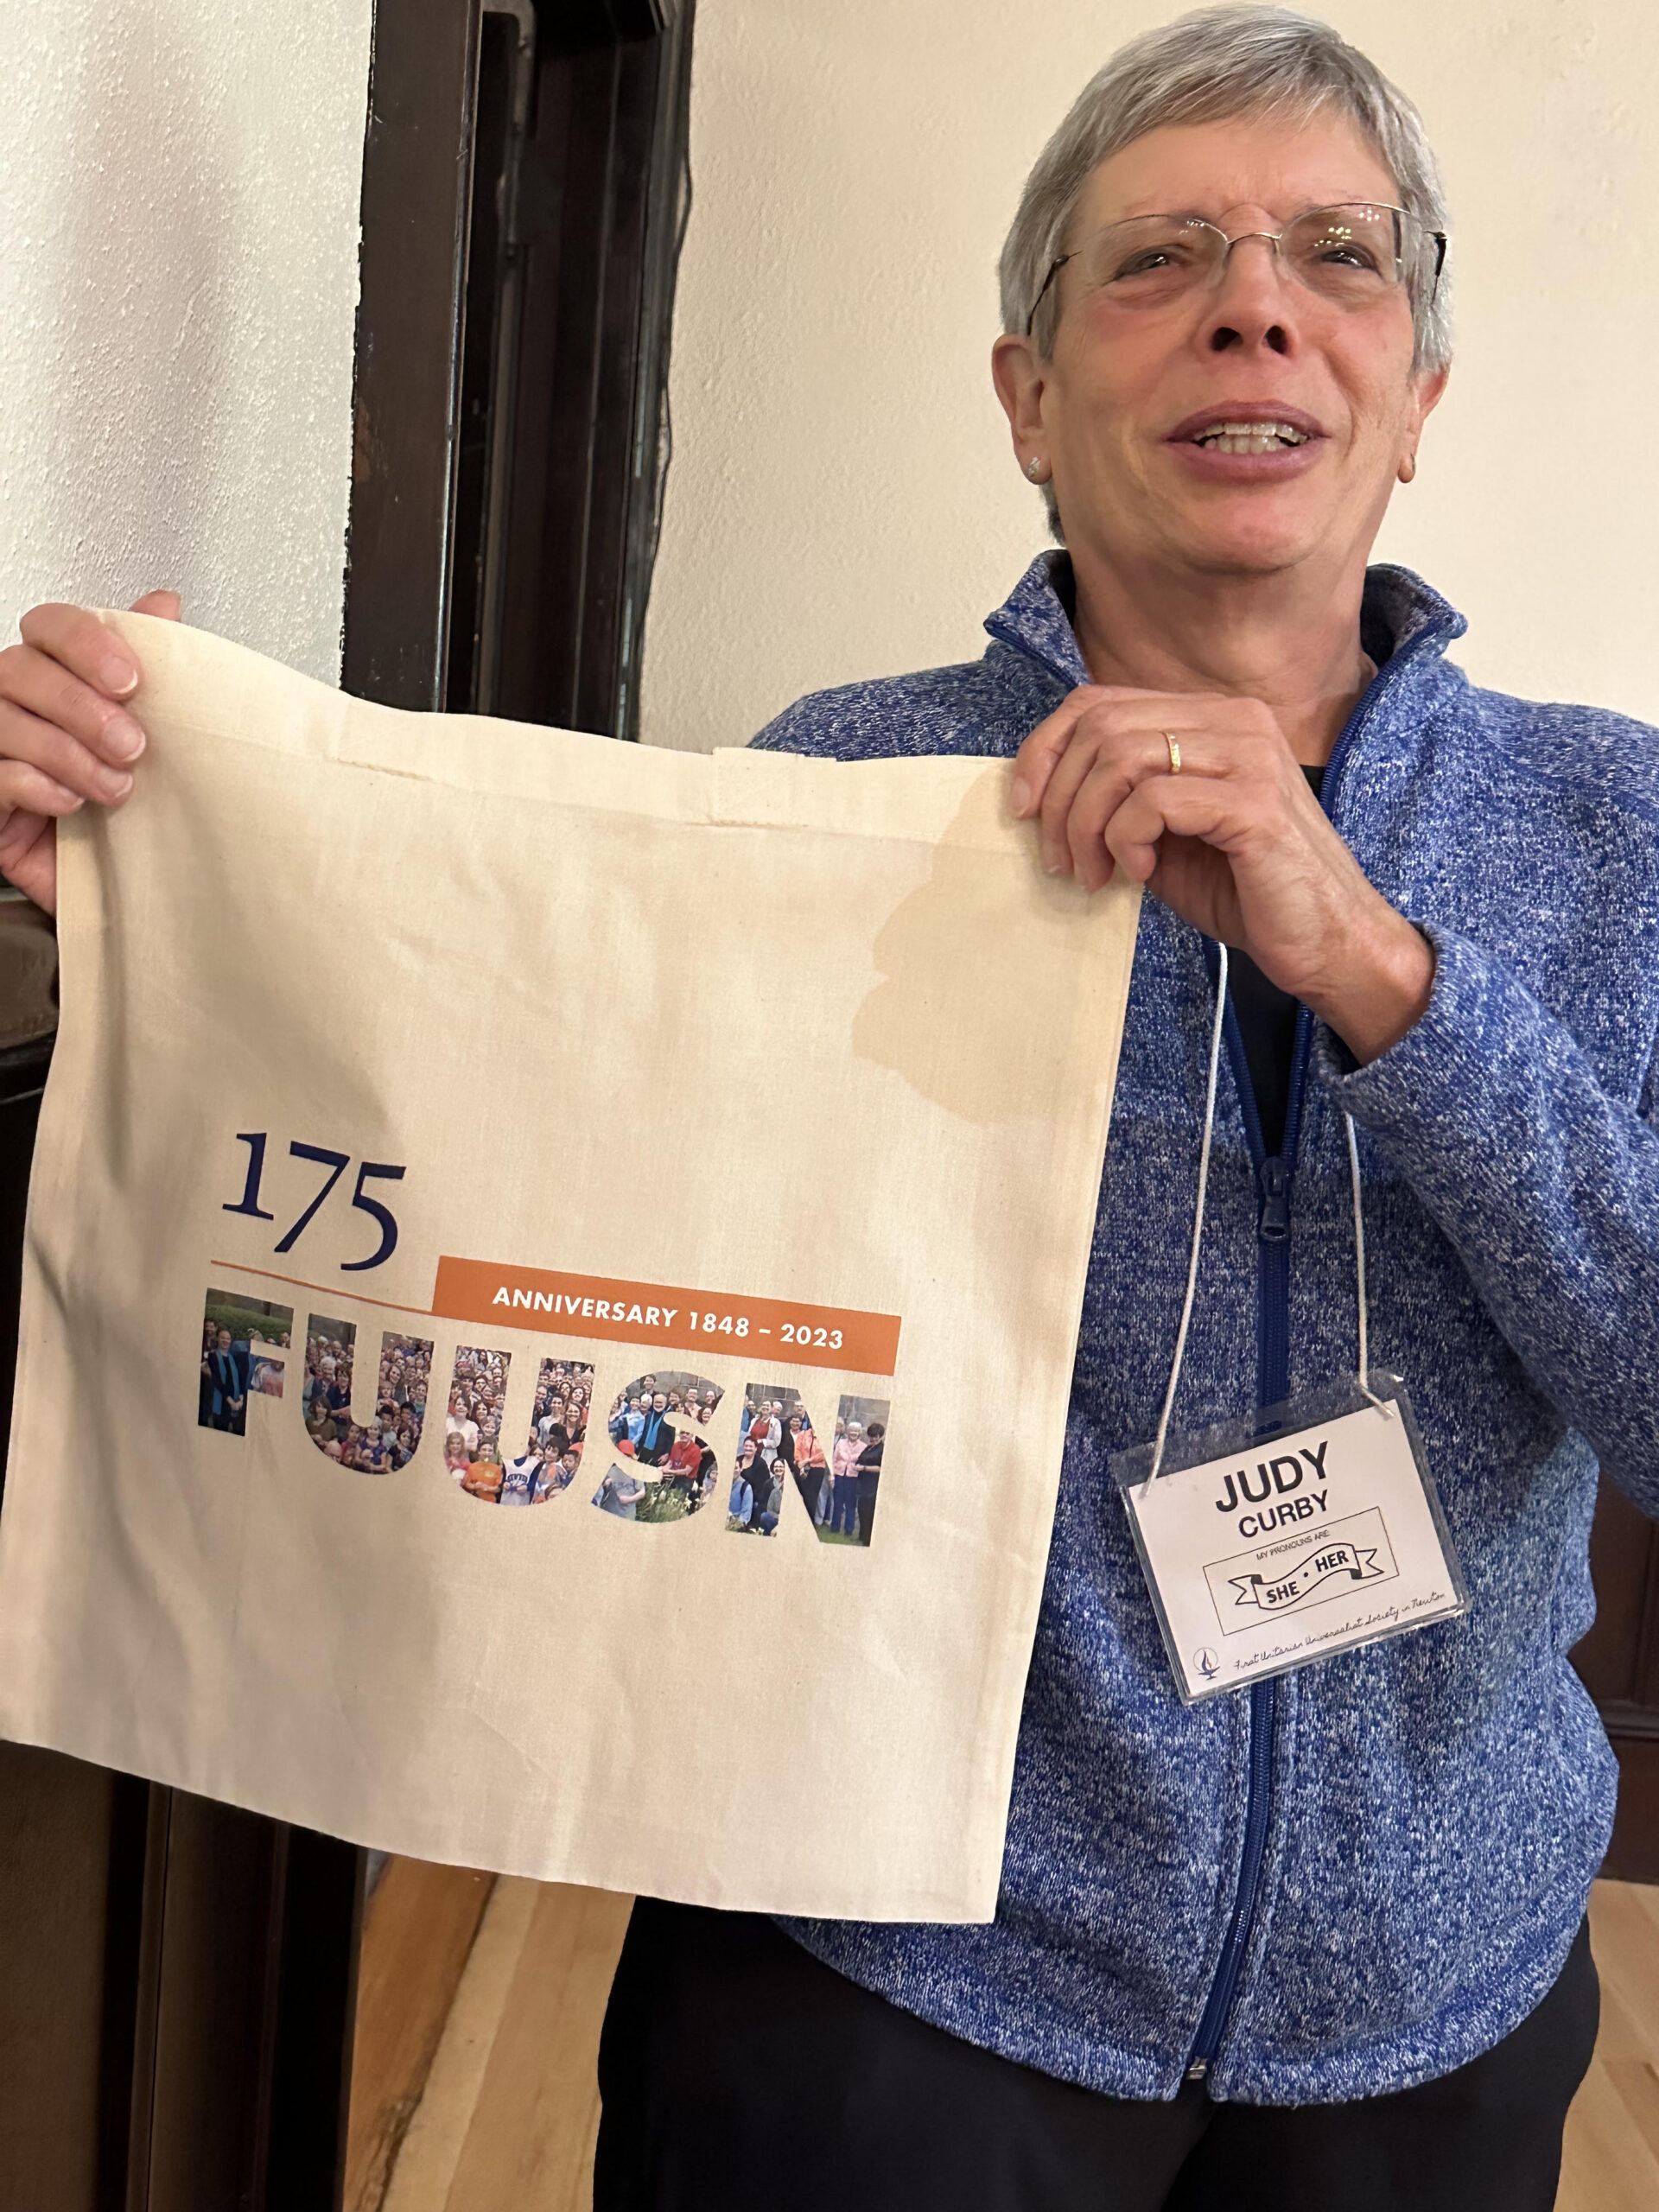 A woman with short gray hair and glasses in a blue zipped flannel sweater proudly holds up her 175th Anniversary tote bag.